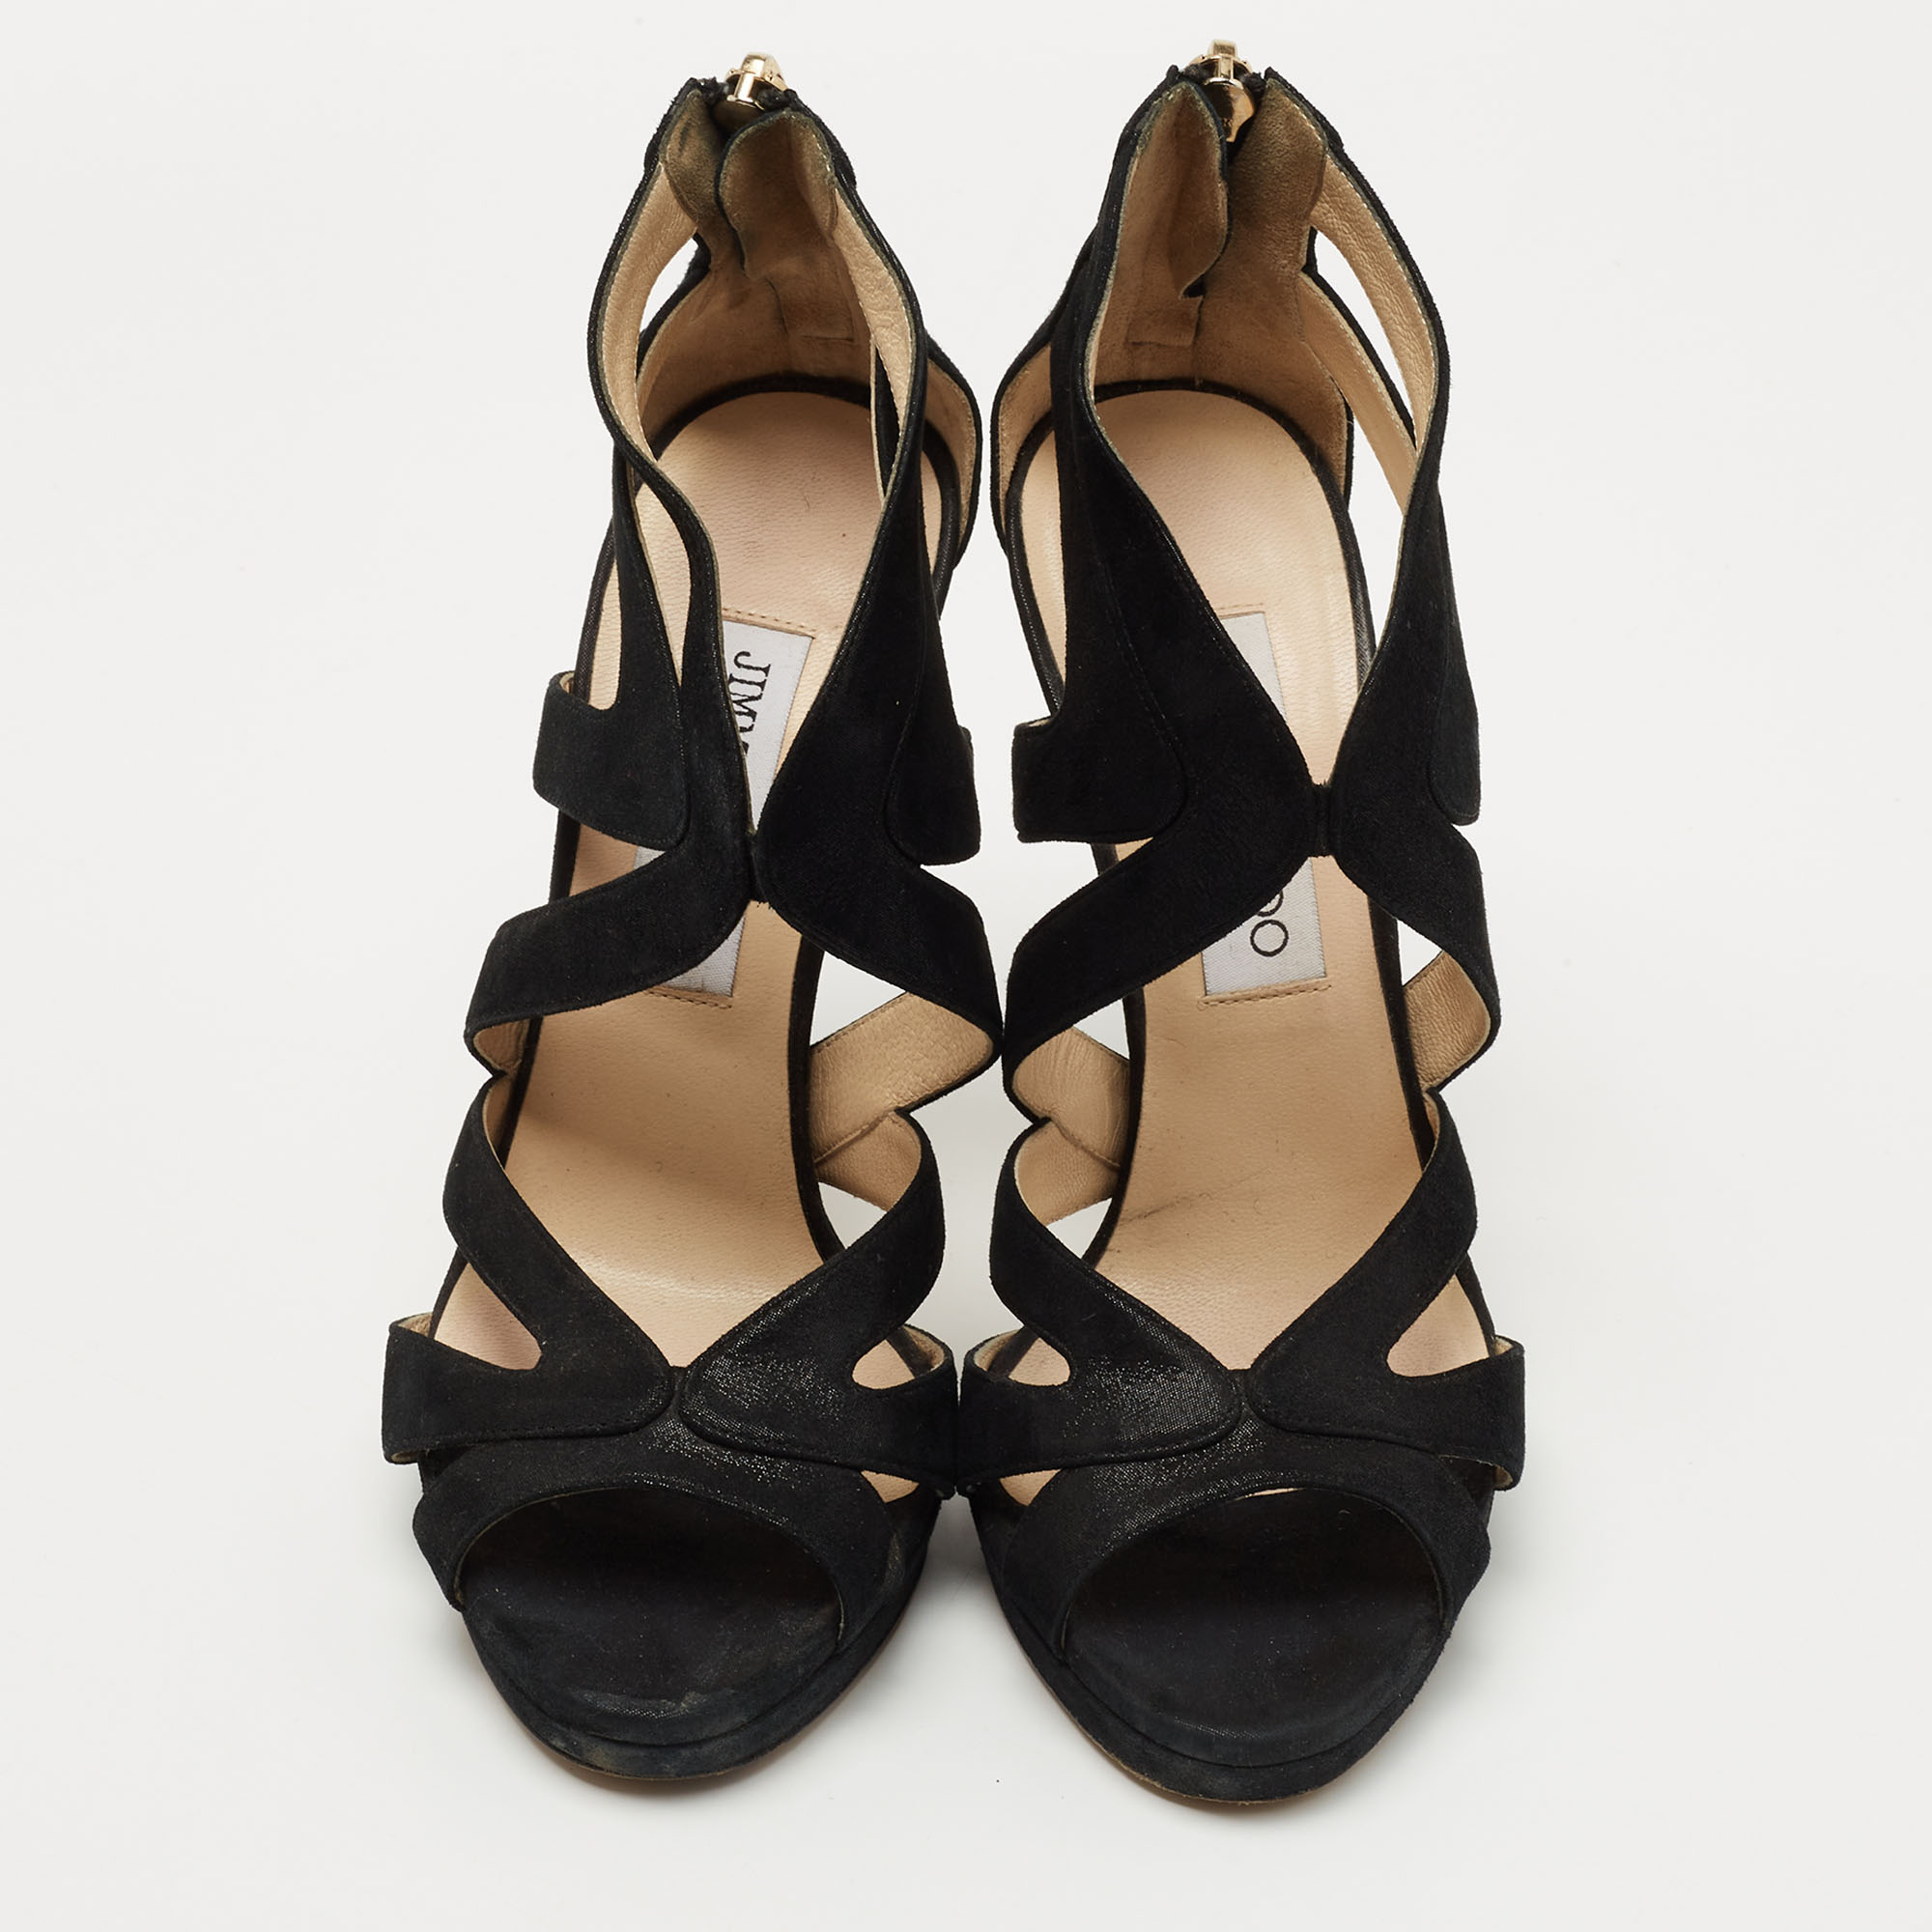 Jimmy Choo Black Suede Strappy Sandals Size 36